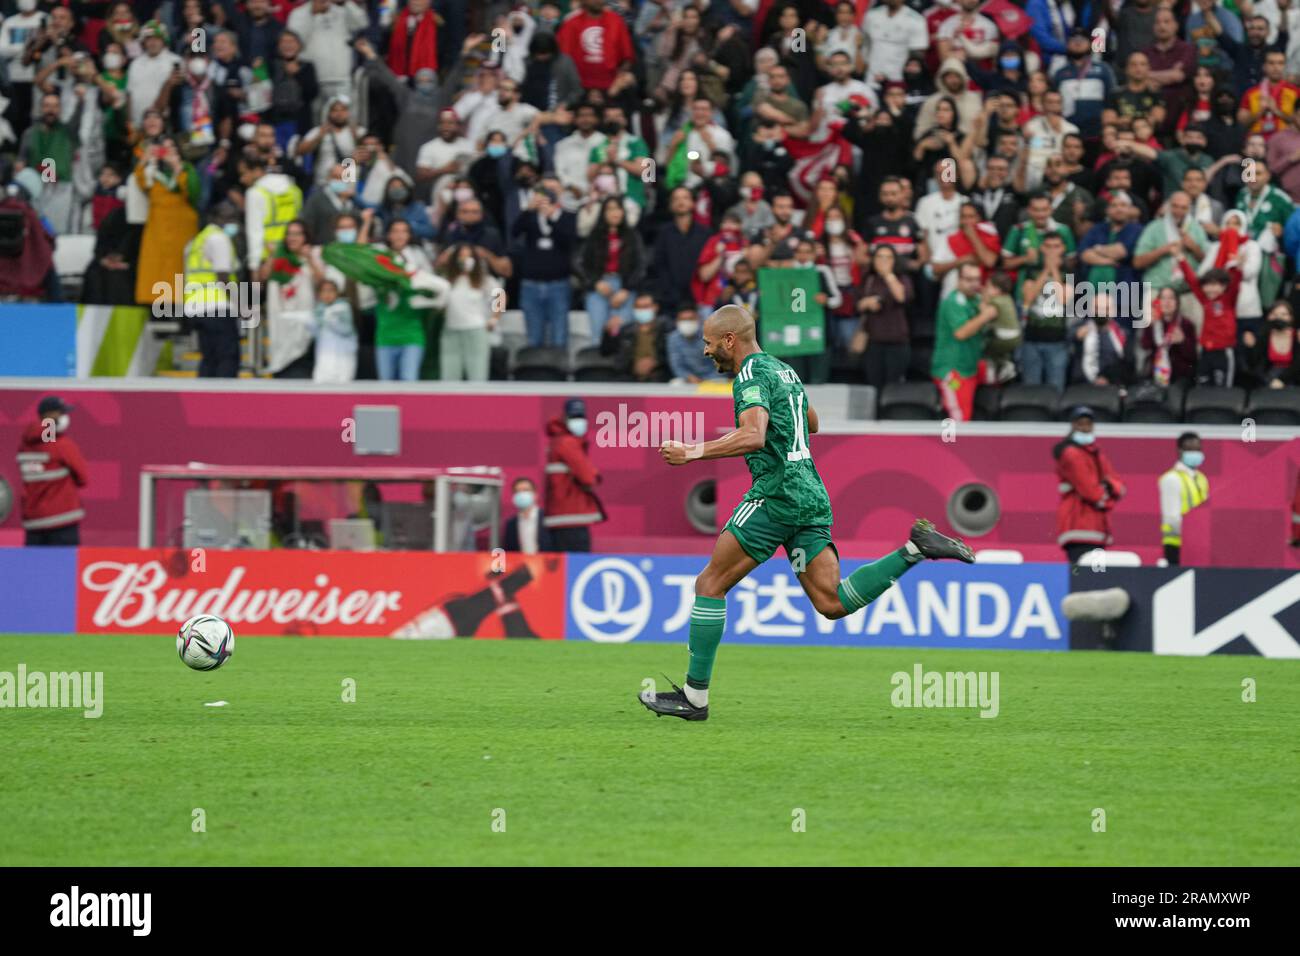 Yacine Brahimi started celebrating before scoring the goal that sealed Algeria's win during the FIFA Arab Cup final match. Stock Photo